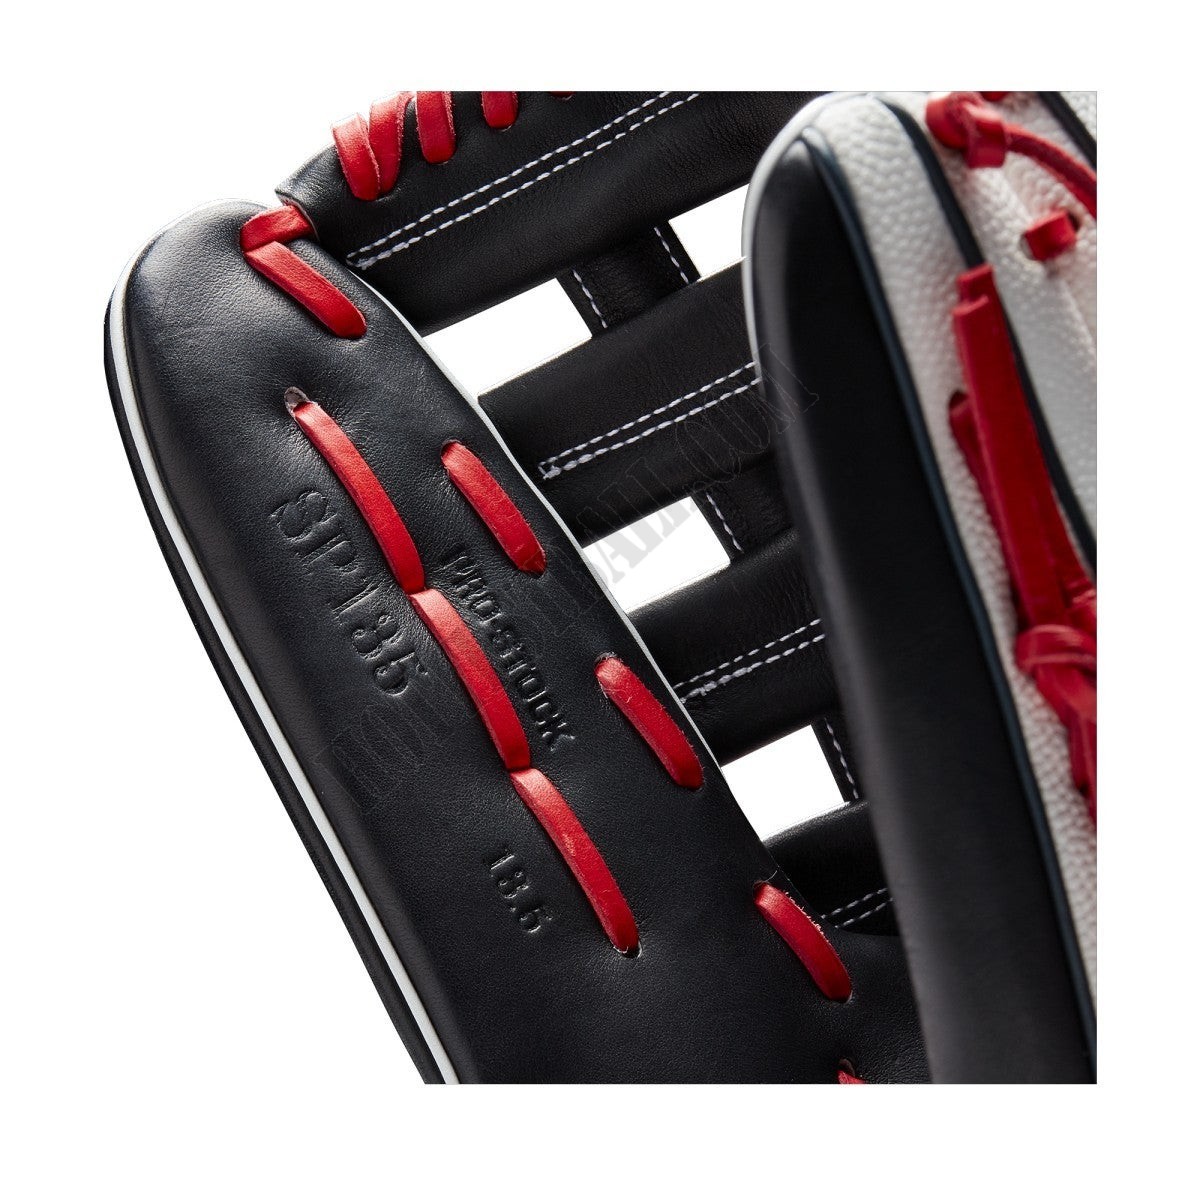 2020 A2000 SP135 13.5" Slowpitch Softball Glove ● Wilson Promotions - -7